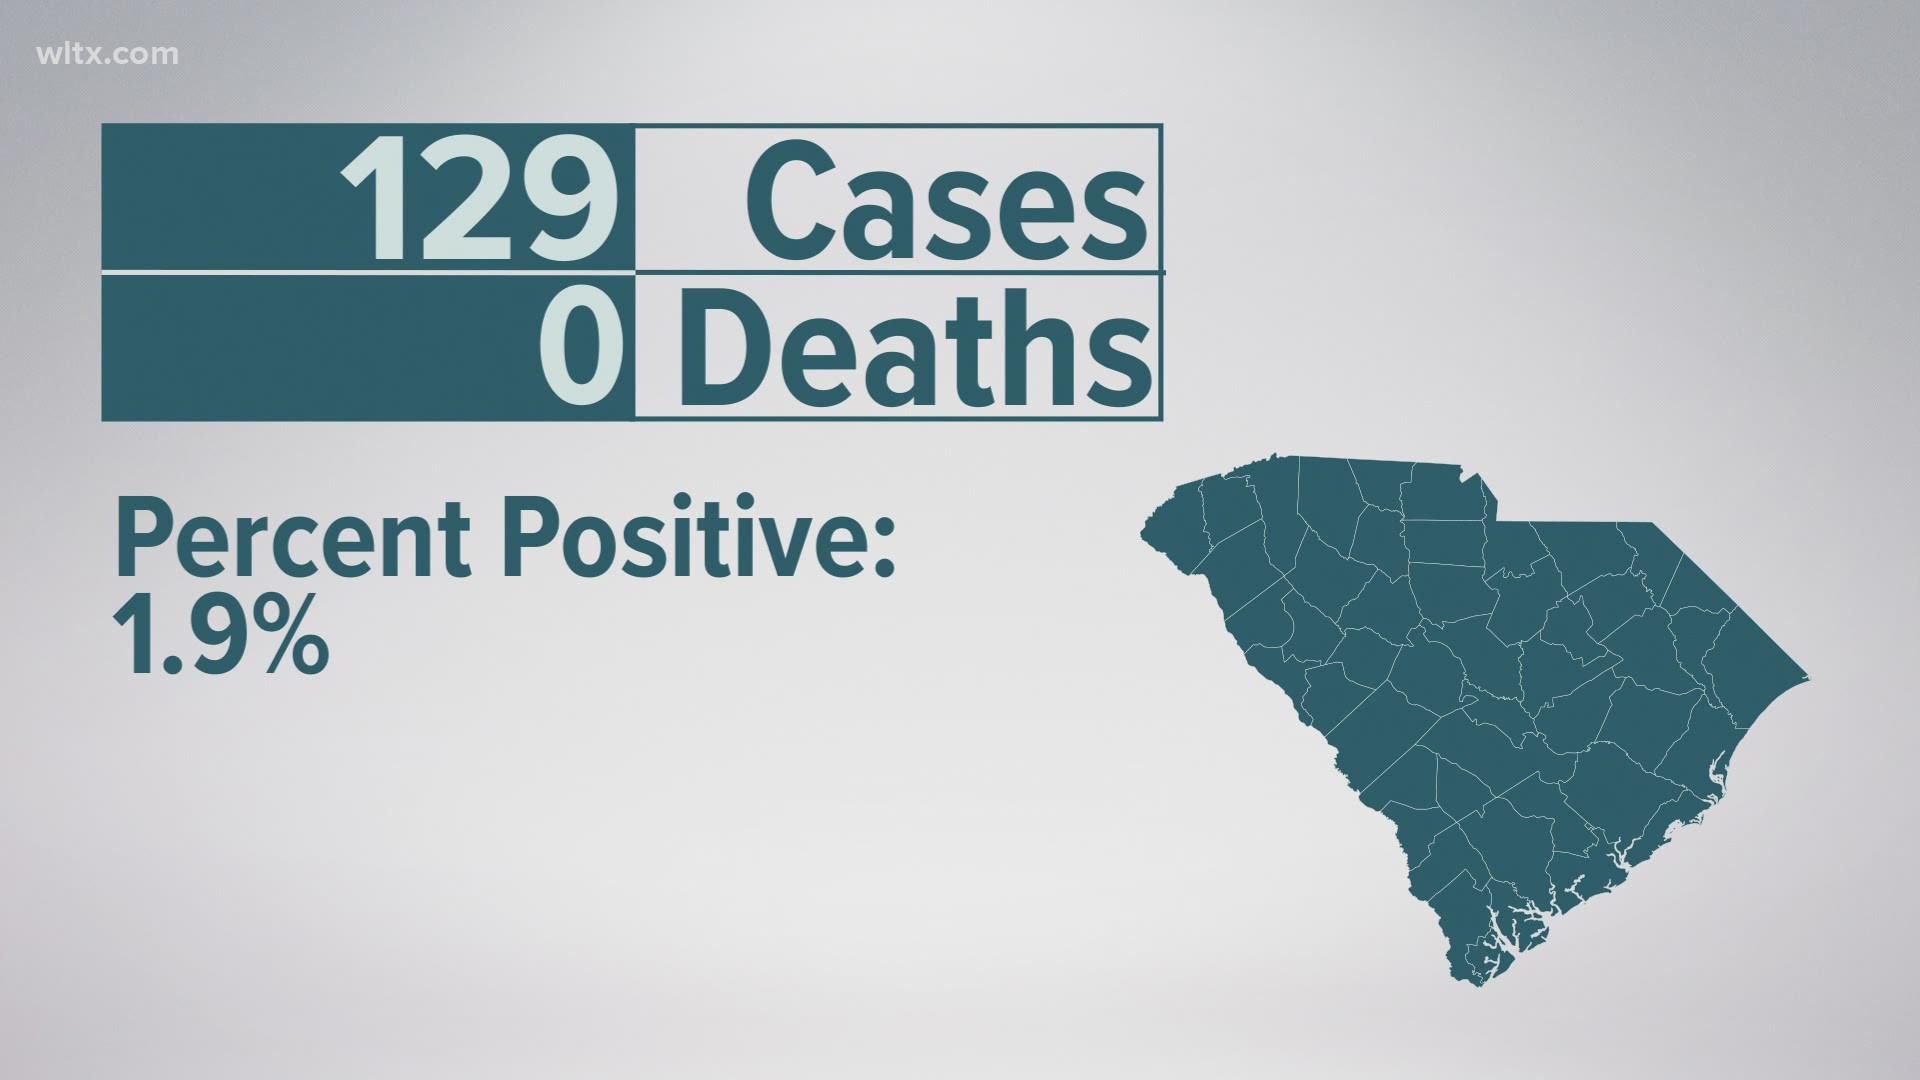 The state did have 169 cases